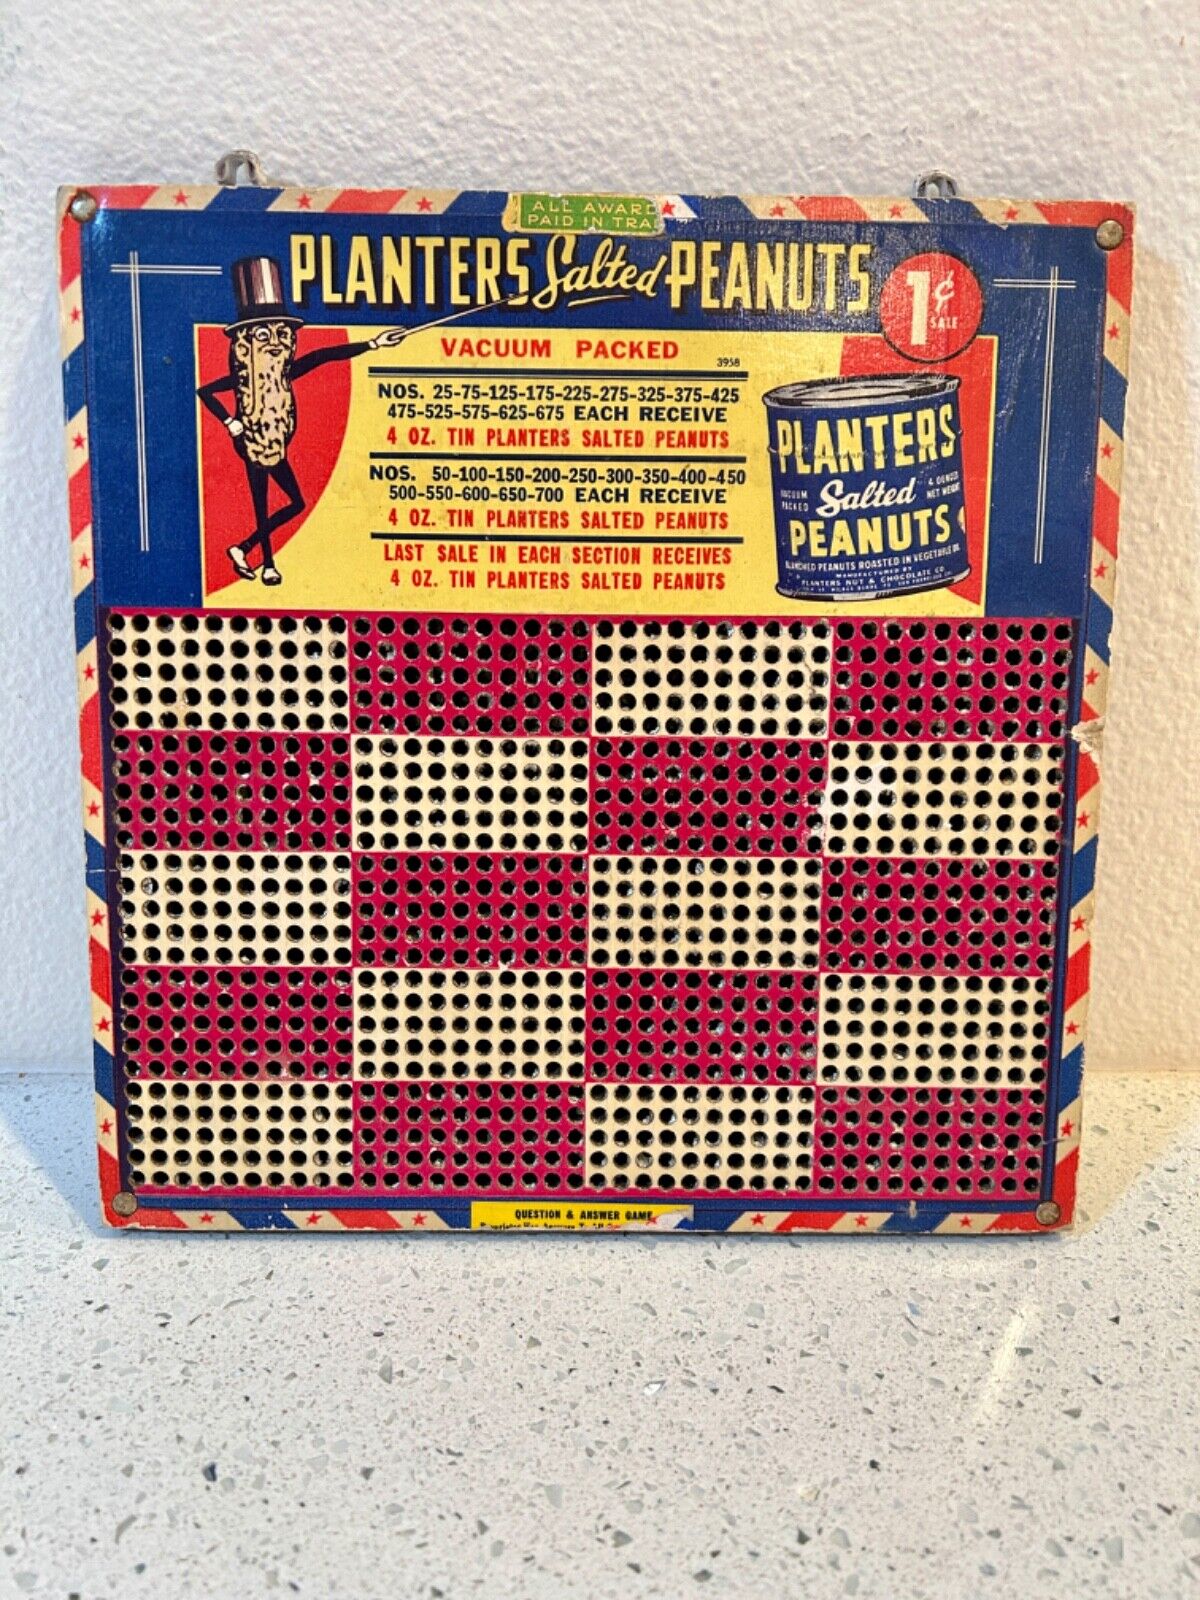 PLANTERS SALTED PEANUTS Vintage Punched Punchboard - Great for Display